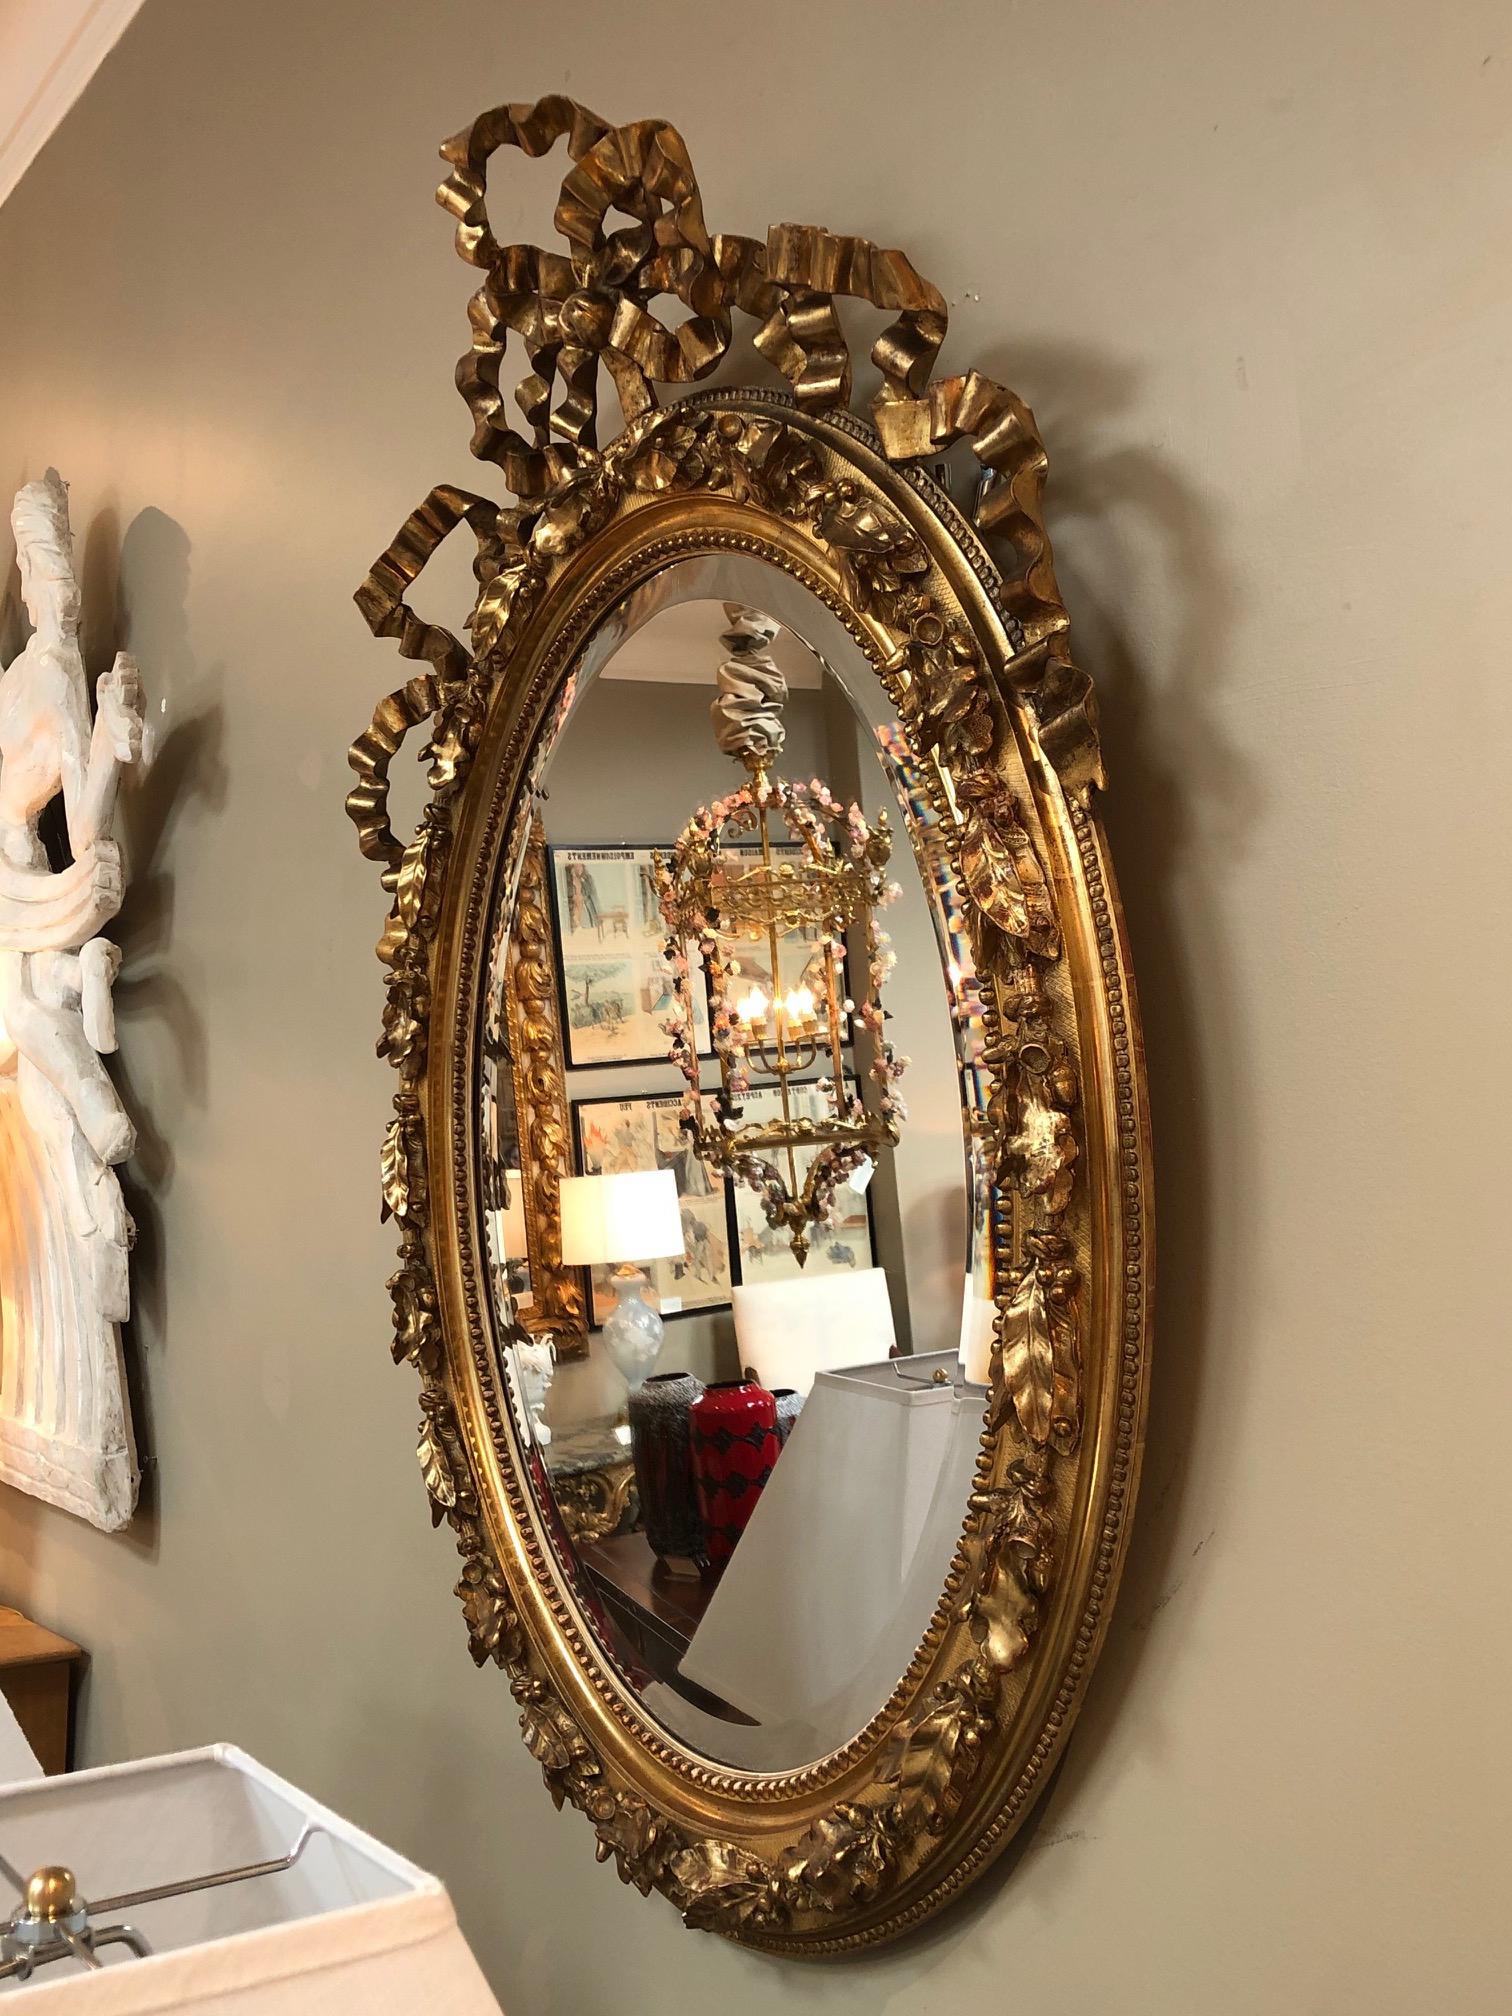 The well-executed mirror with flourishing ribbon crest above an oval frame adorned with oak and laurel leaf border; surrounding the original beveled mirror.